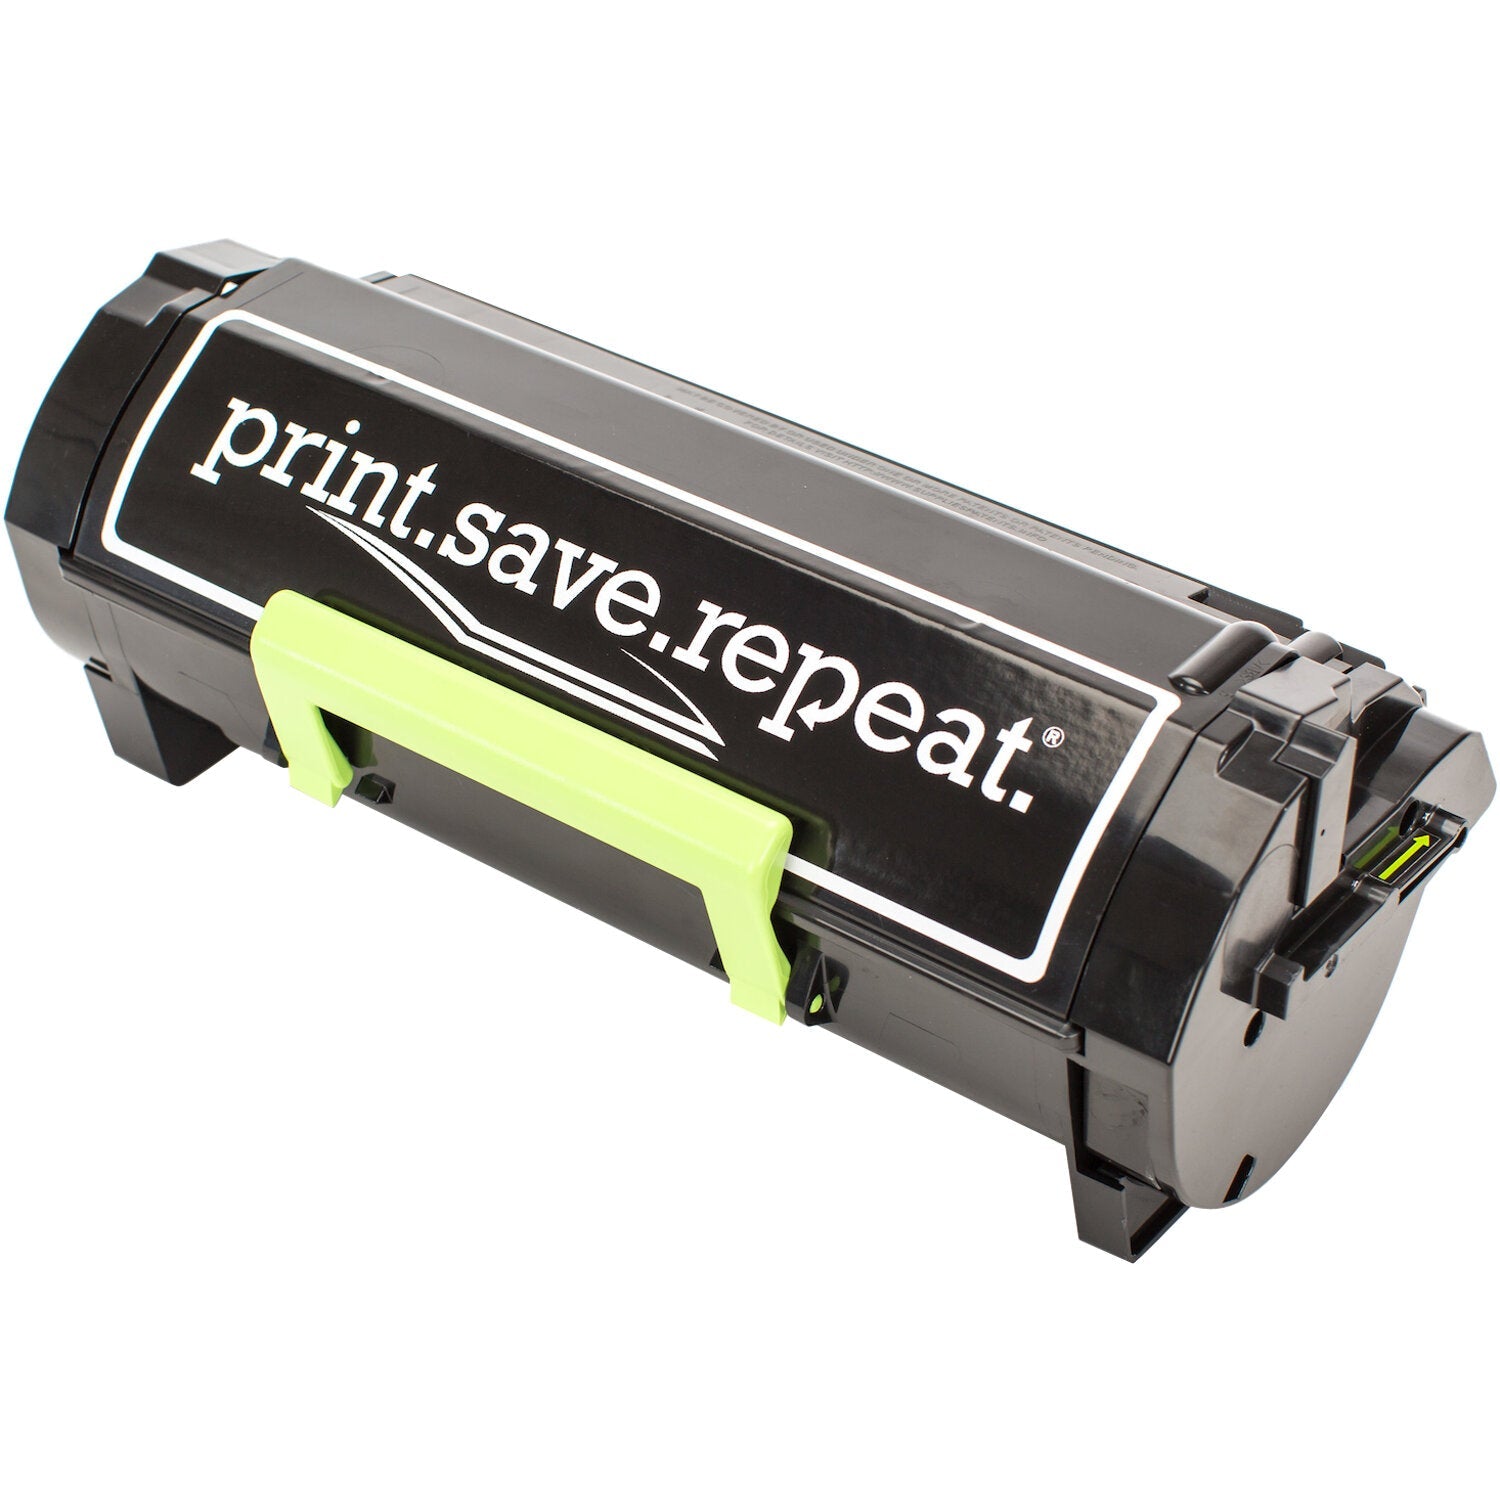 Print.Save.Repeat. Lexmark 501XE Extra High Yield Remanufactured Toner Cartridge (50F1X0E) for MS410, MS415, MS510, MS610 [10,000 Pages]